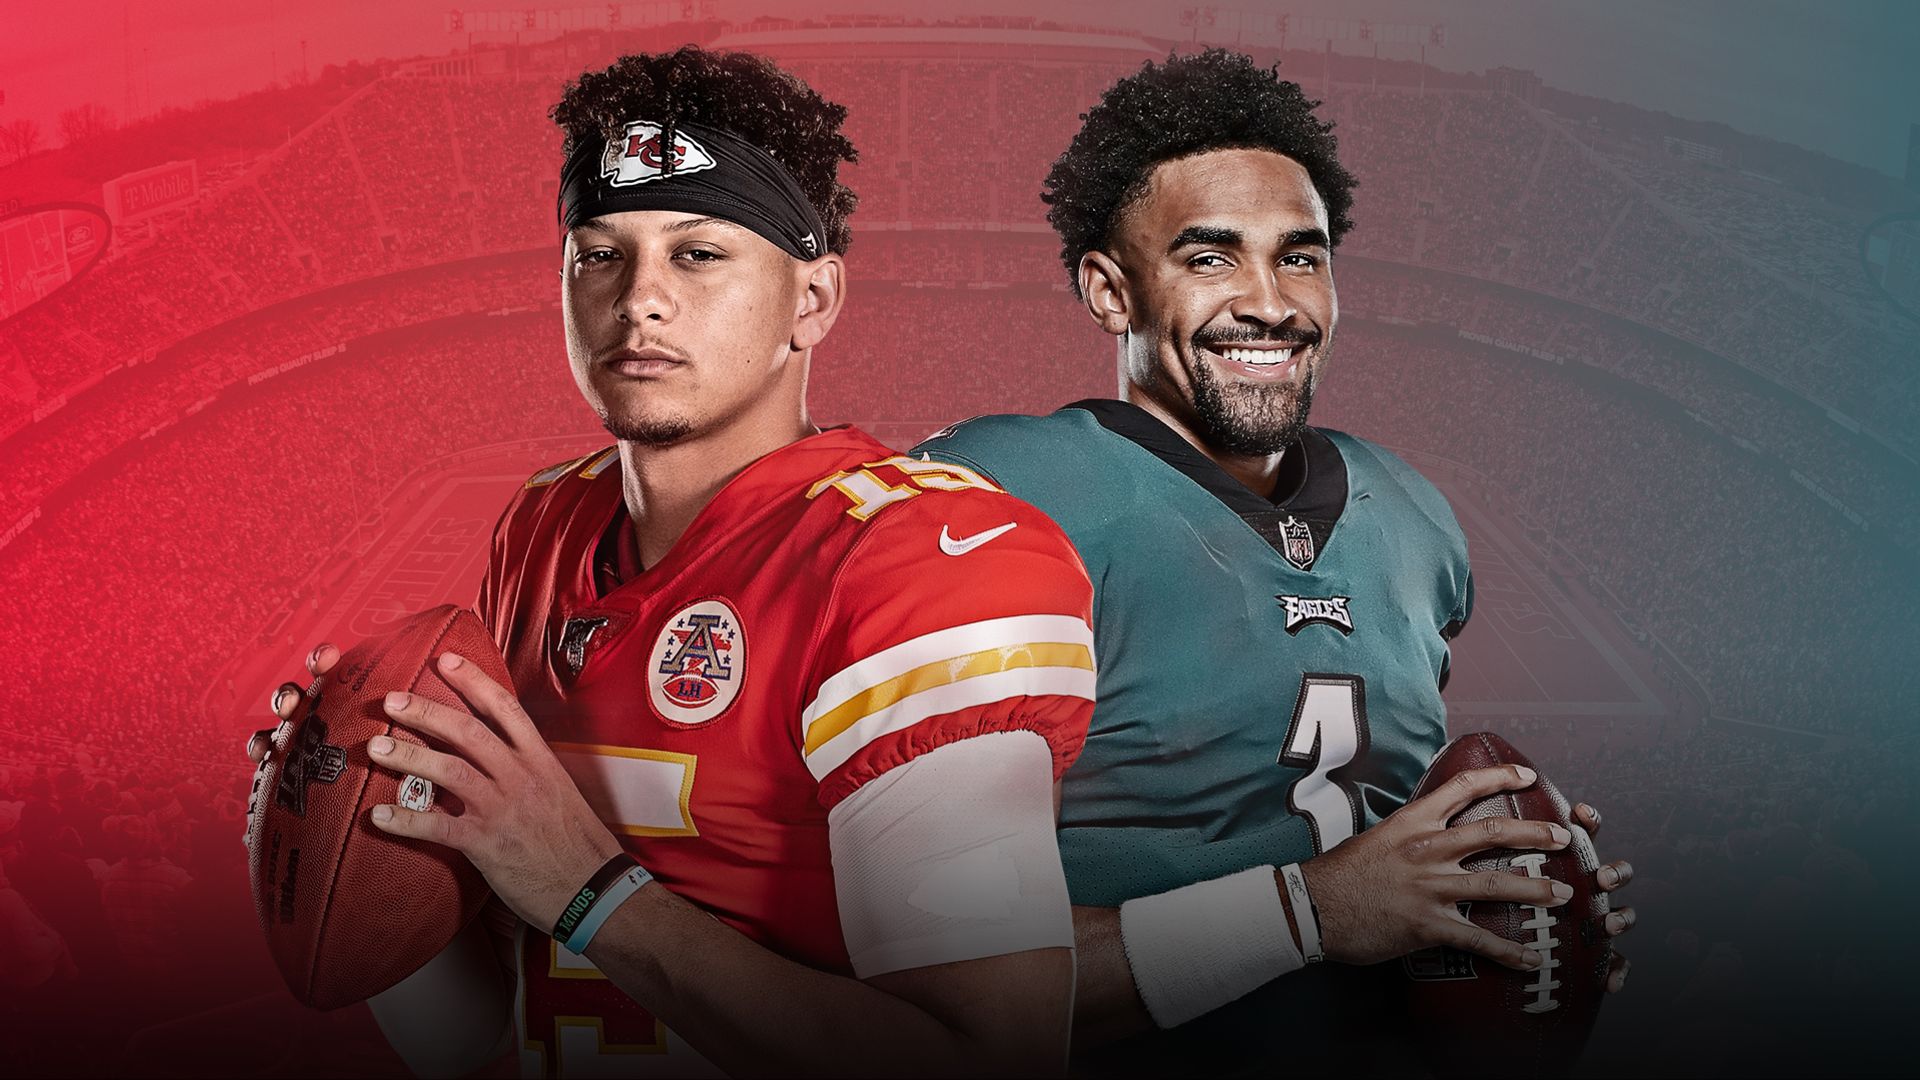 No 1 seed Chiefs and Eagles ready to make NFL playoff mark